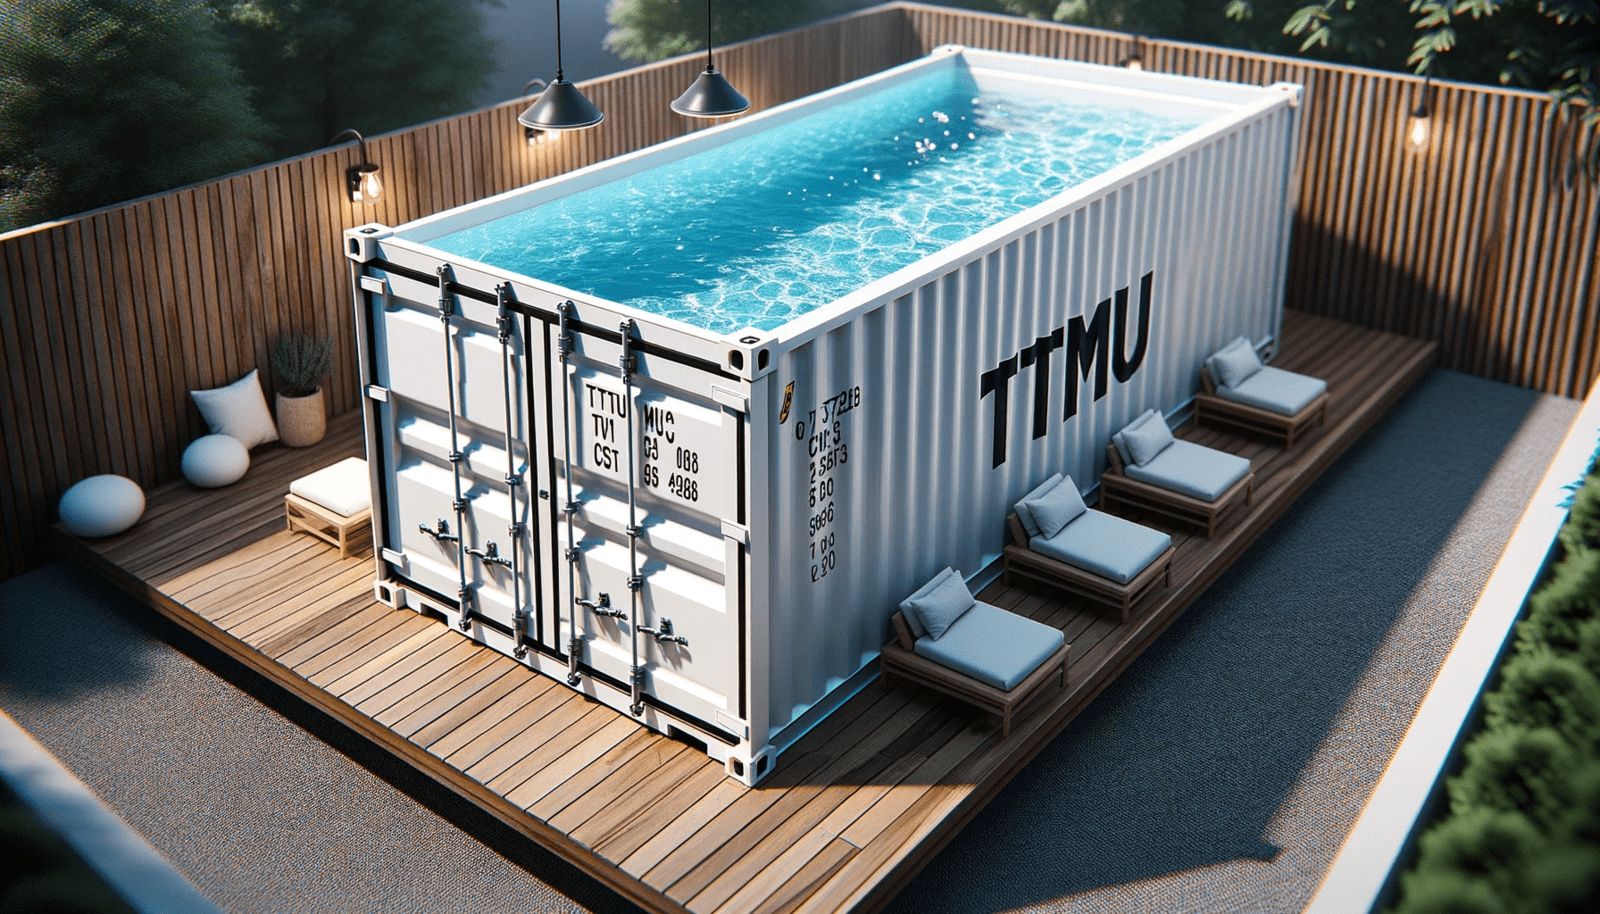 Thinking of the Summer Already? How about Transforming a Shipping Container into a Swimming pool?